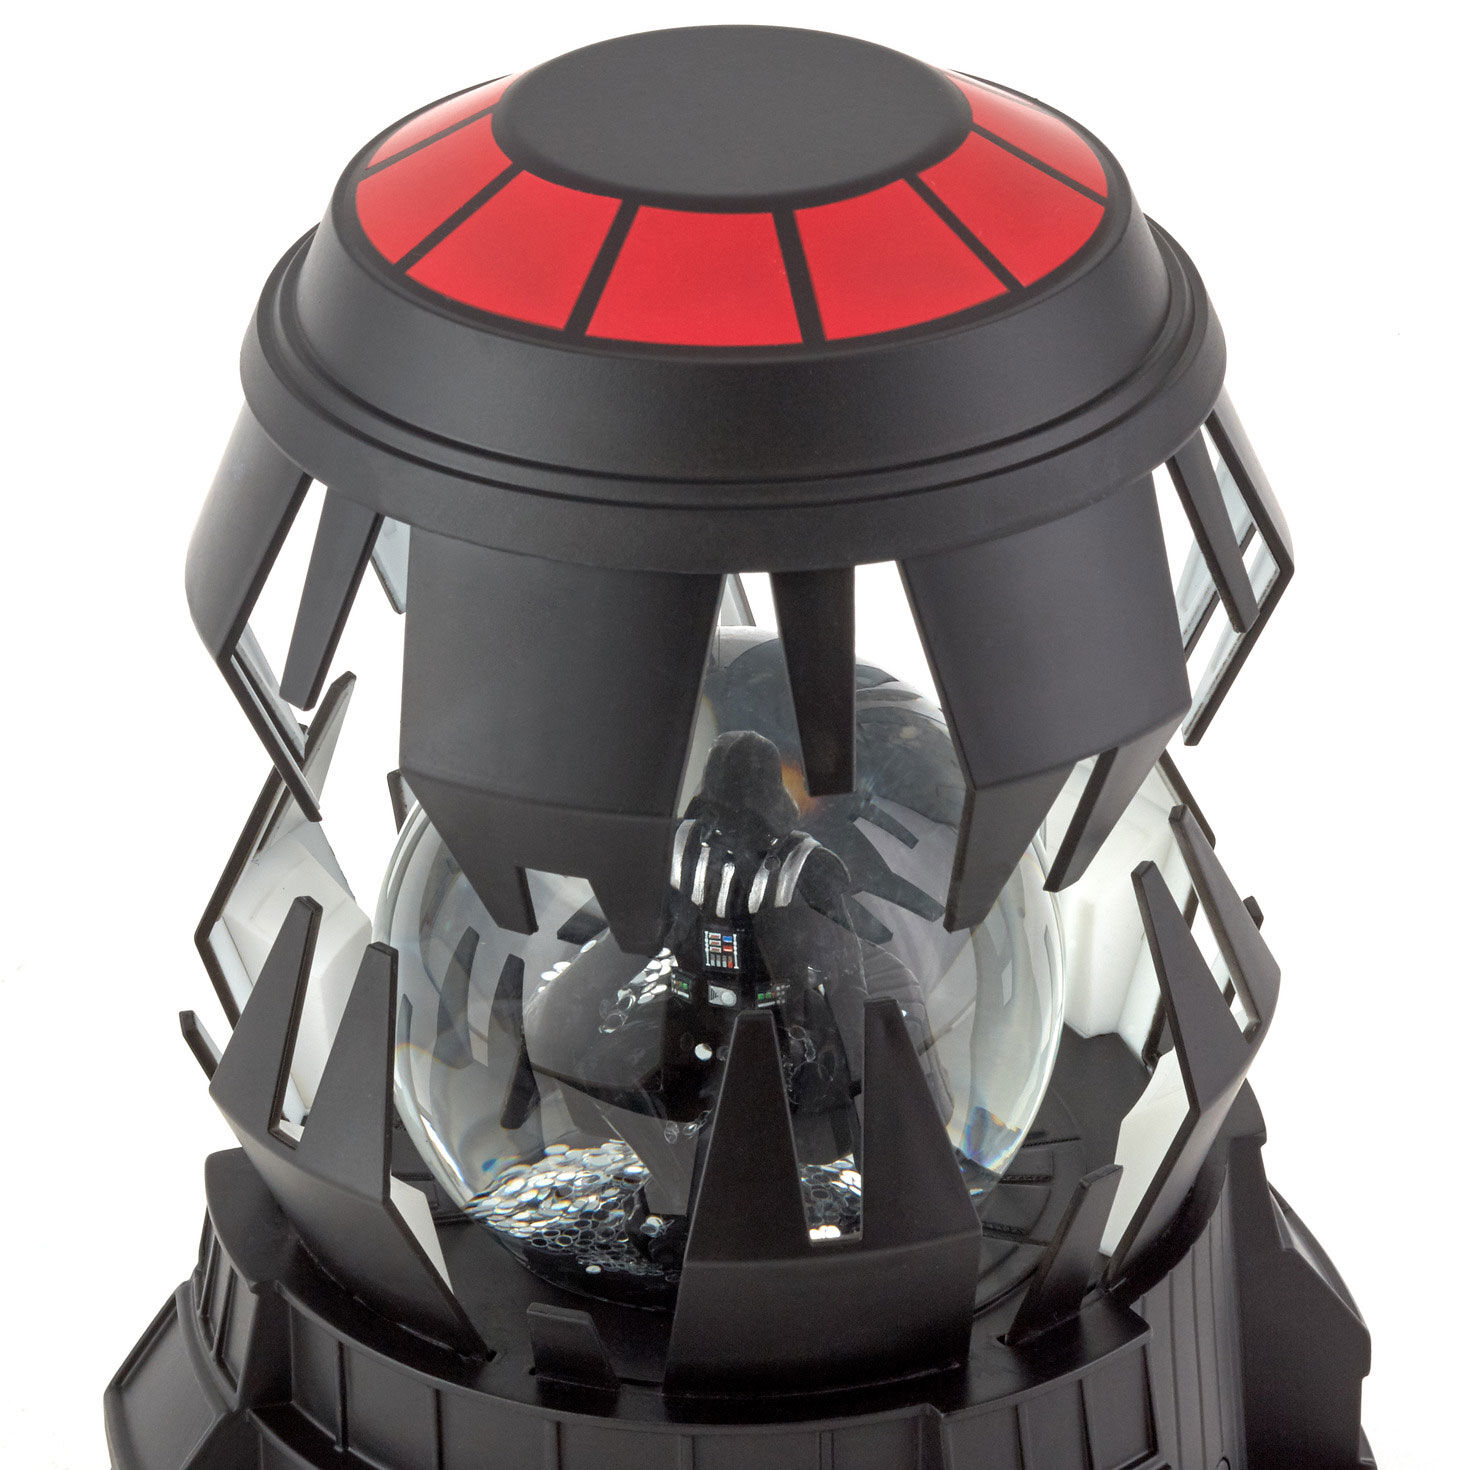 Star Wars™ Darth Vader™ Chamber Water Globe With Light and Sound for only USD 99.99 | Hallmark